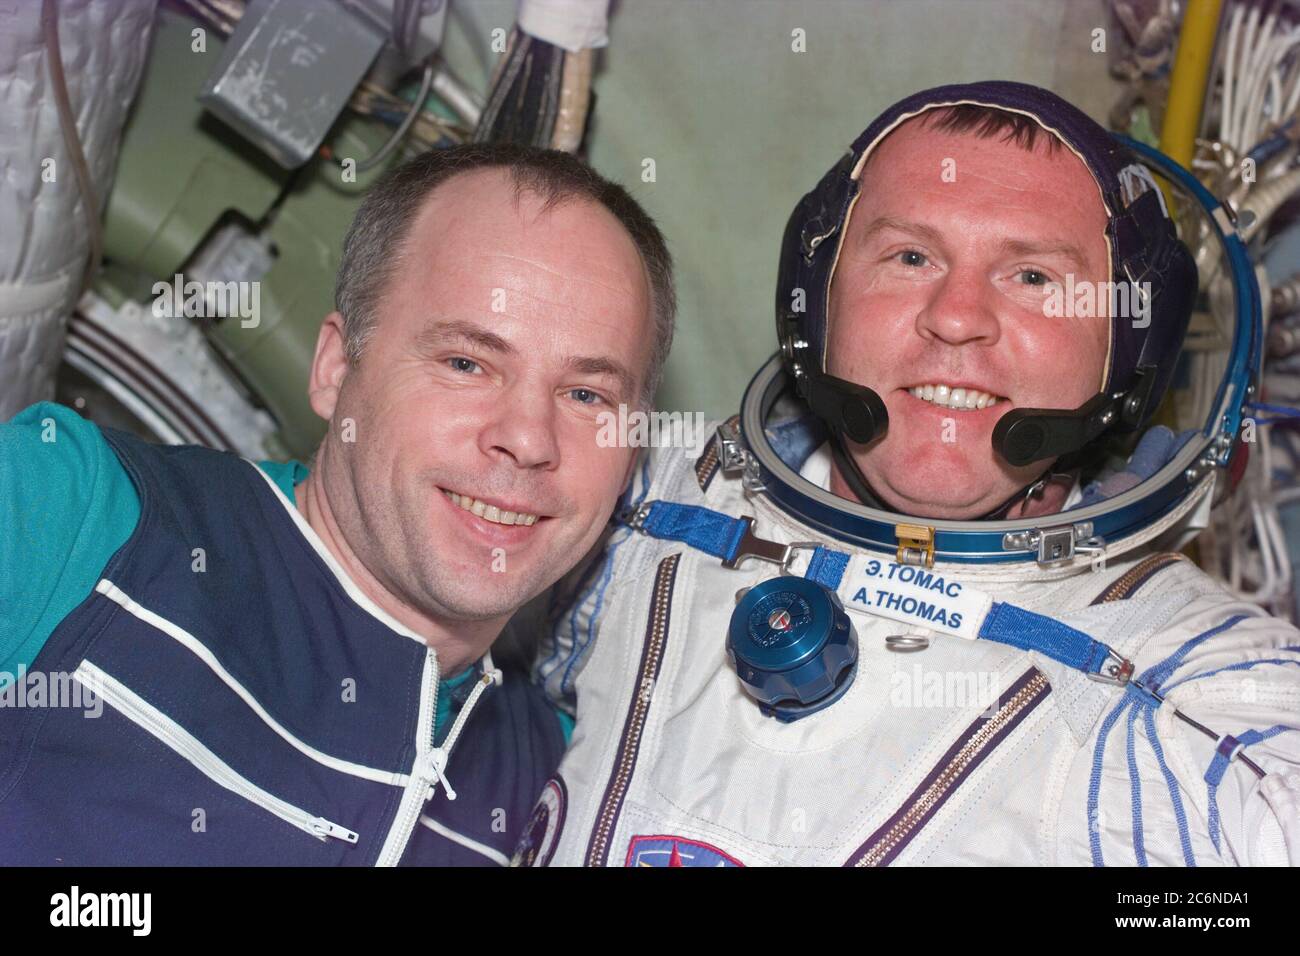 (26 Jan 1998) --- This Electronic Still Camera (ESC) image shows cosmonaut Anatoliy Y. Solovyev, Mir-24 commander, and Andrew S. W. Thomas, cosmonaut guest researcher, embracing after Thomas' second Sokol suit test.  Thomas had to have modifications made to his Russian Sokol spacesuit shortly after his arrival to the Russian Mir Space Station.  Thomas, replacing astronaut David A. Wolf as cosmonaut guest researcher, will be the last American astronaut to serve a tour onboard the Mir.  This ESC view was taken on January 26, 1998, at 12:55:07 MET. Stock Photo